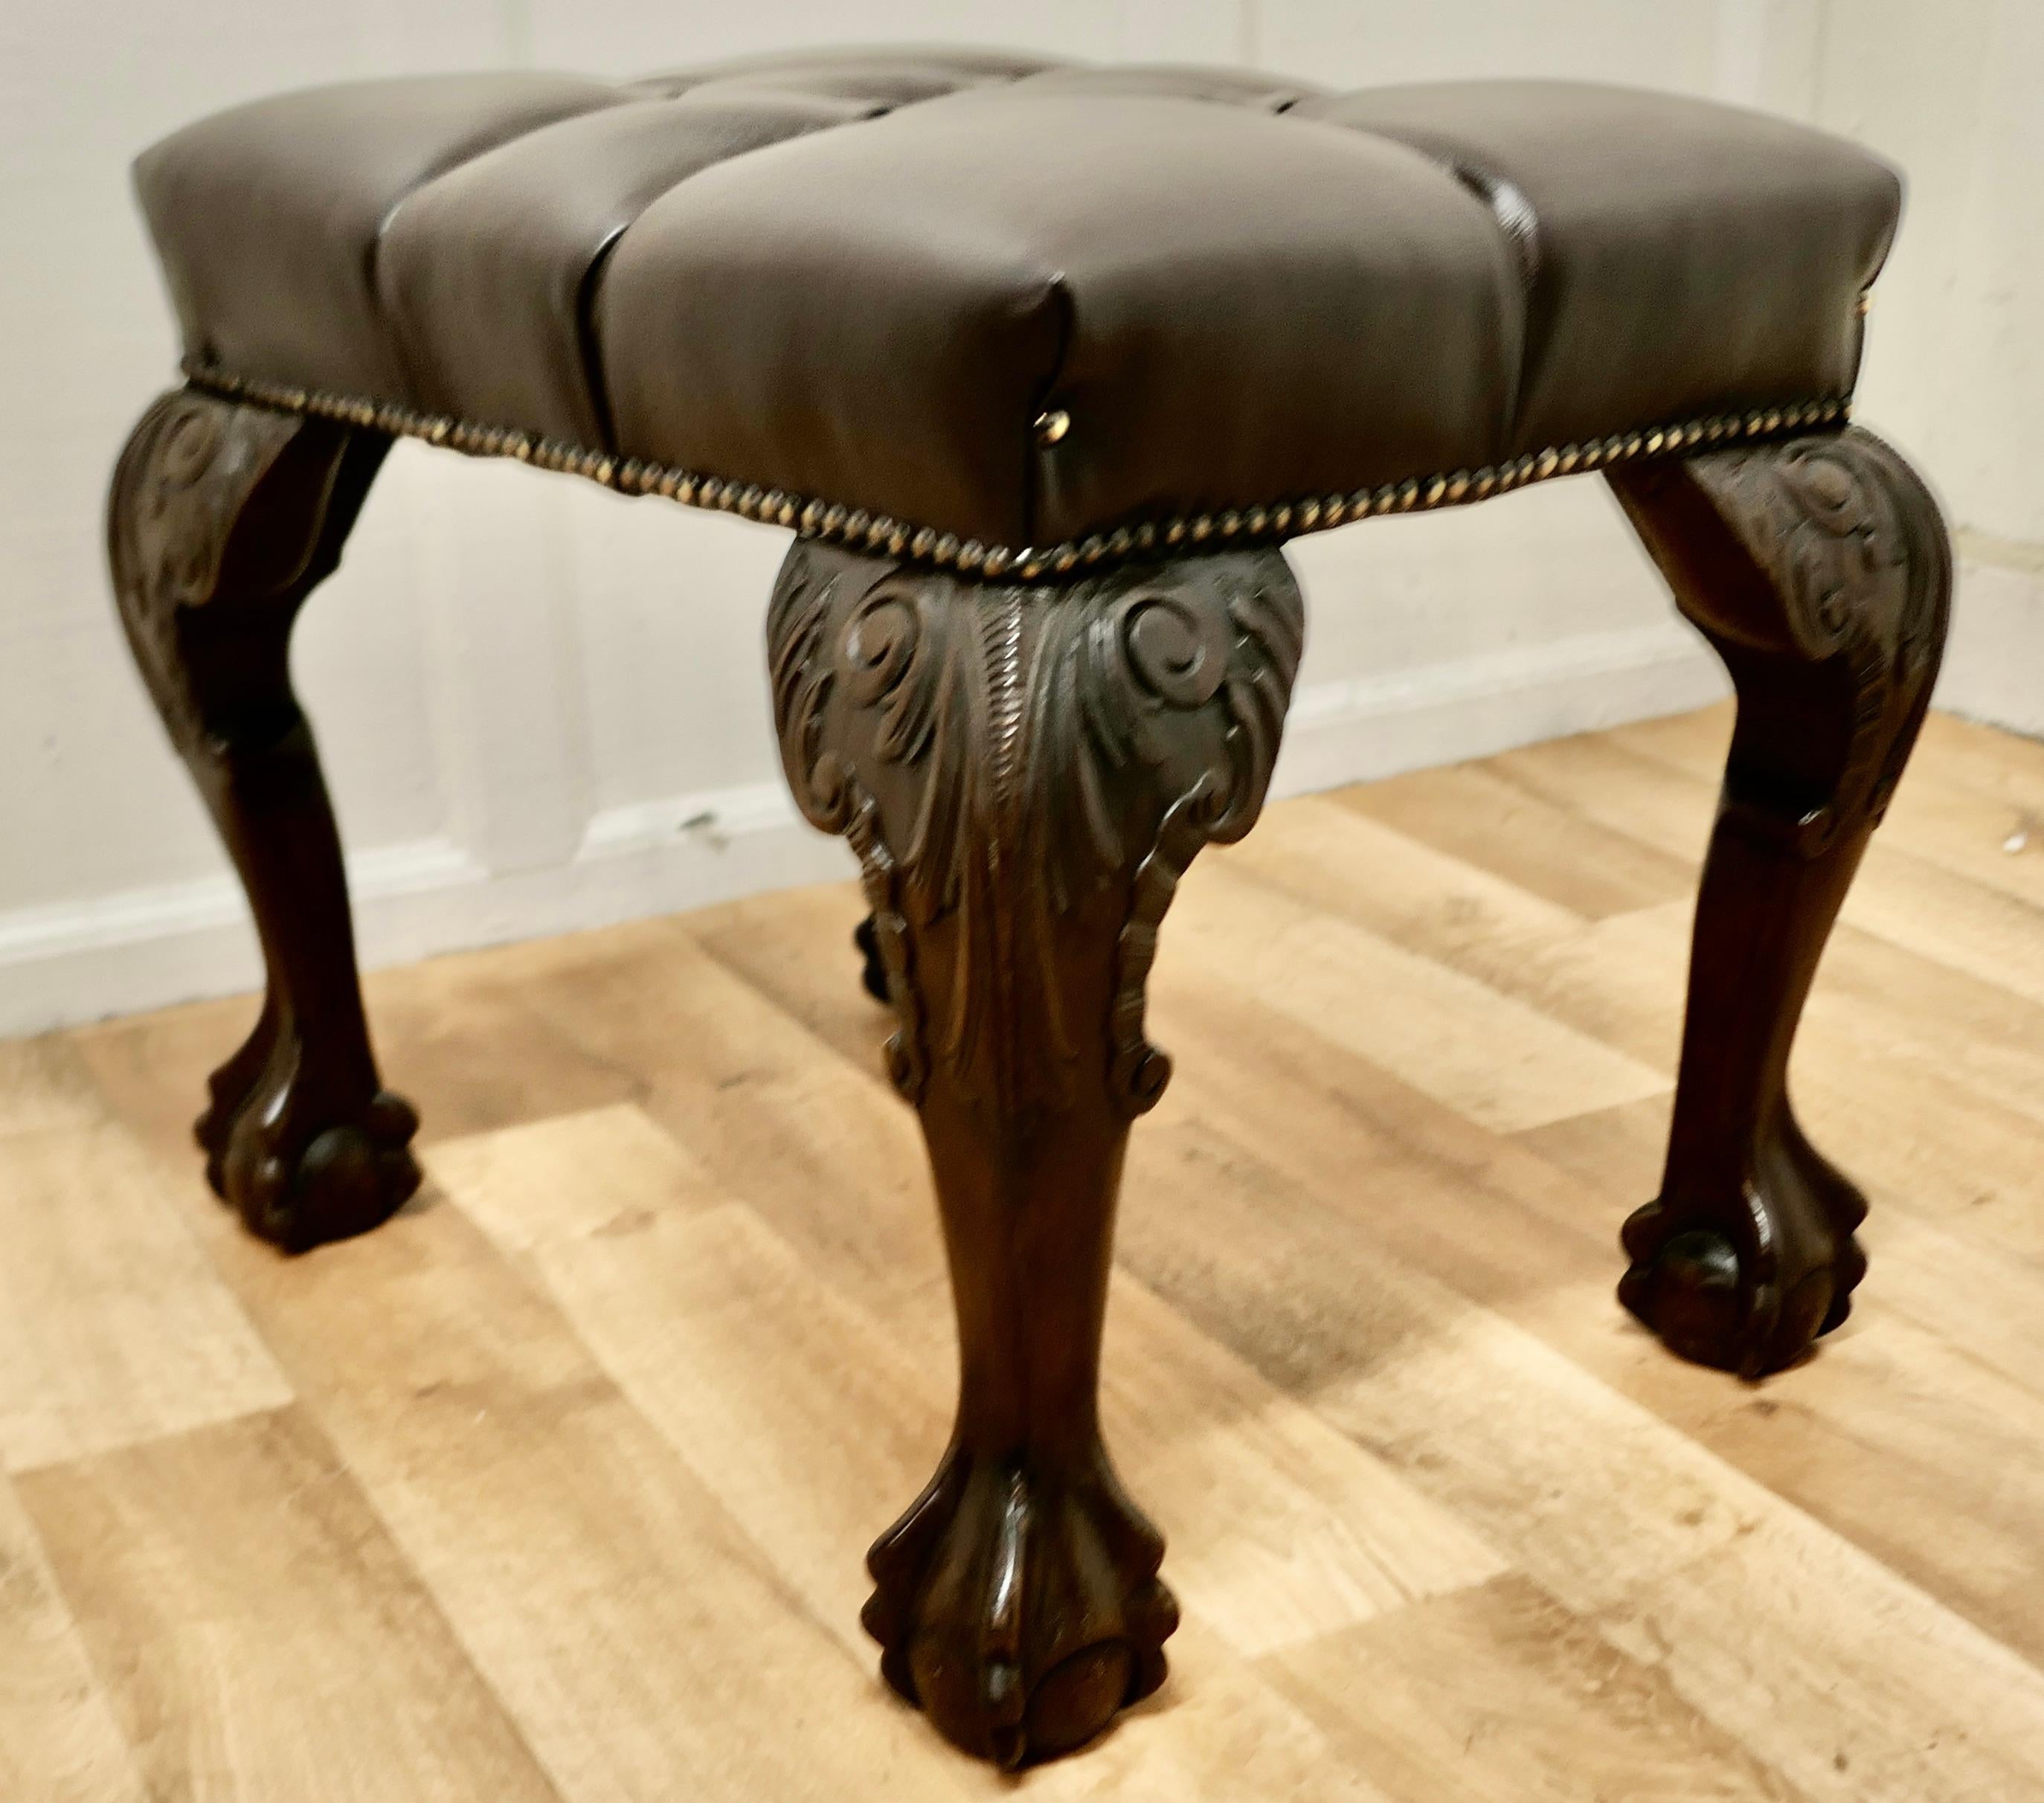 A 19th century carved walnut leather chesterfield library stool.

The stool is upholstered in deeply buttoned brown leather hide, it set on hefty ball and claw walnut cabriole legs which have deeply carved knees

An excellent piece of country